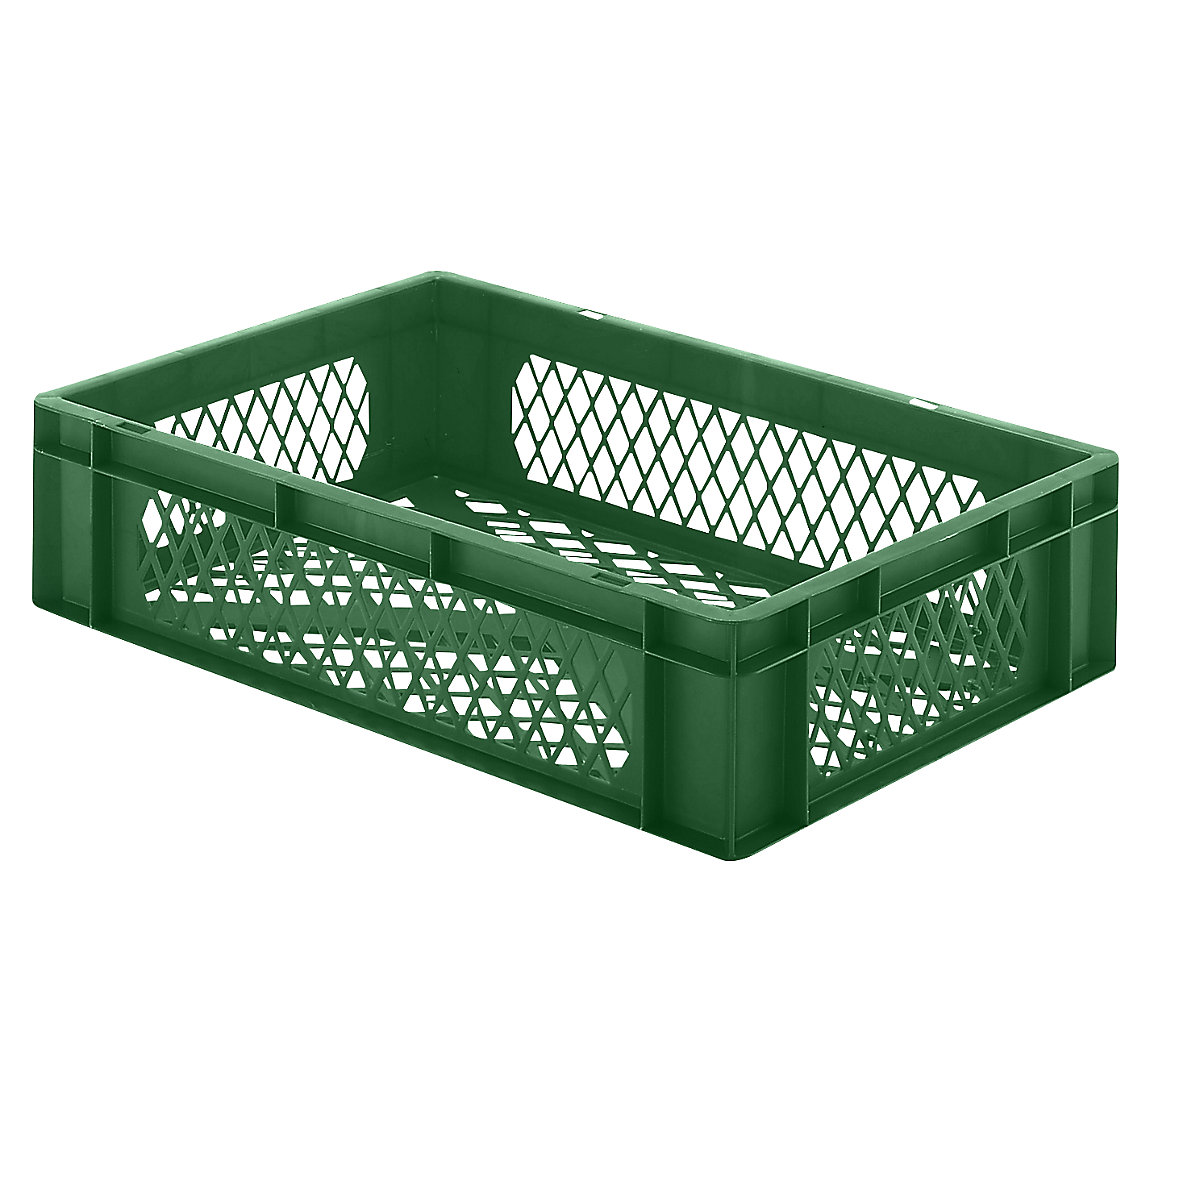 Euro stacking container, perforated walls and base, LxWxH 600 x 400 x 145 mm, green, pack of 5